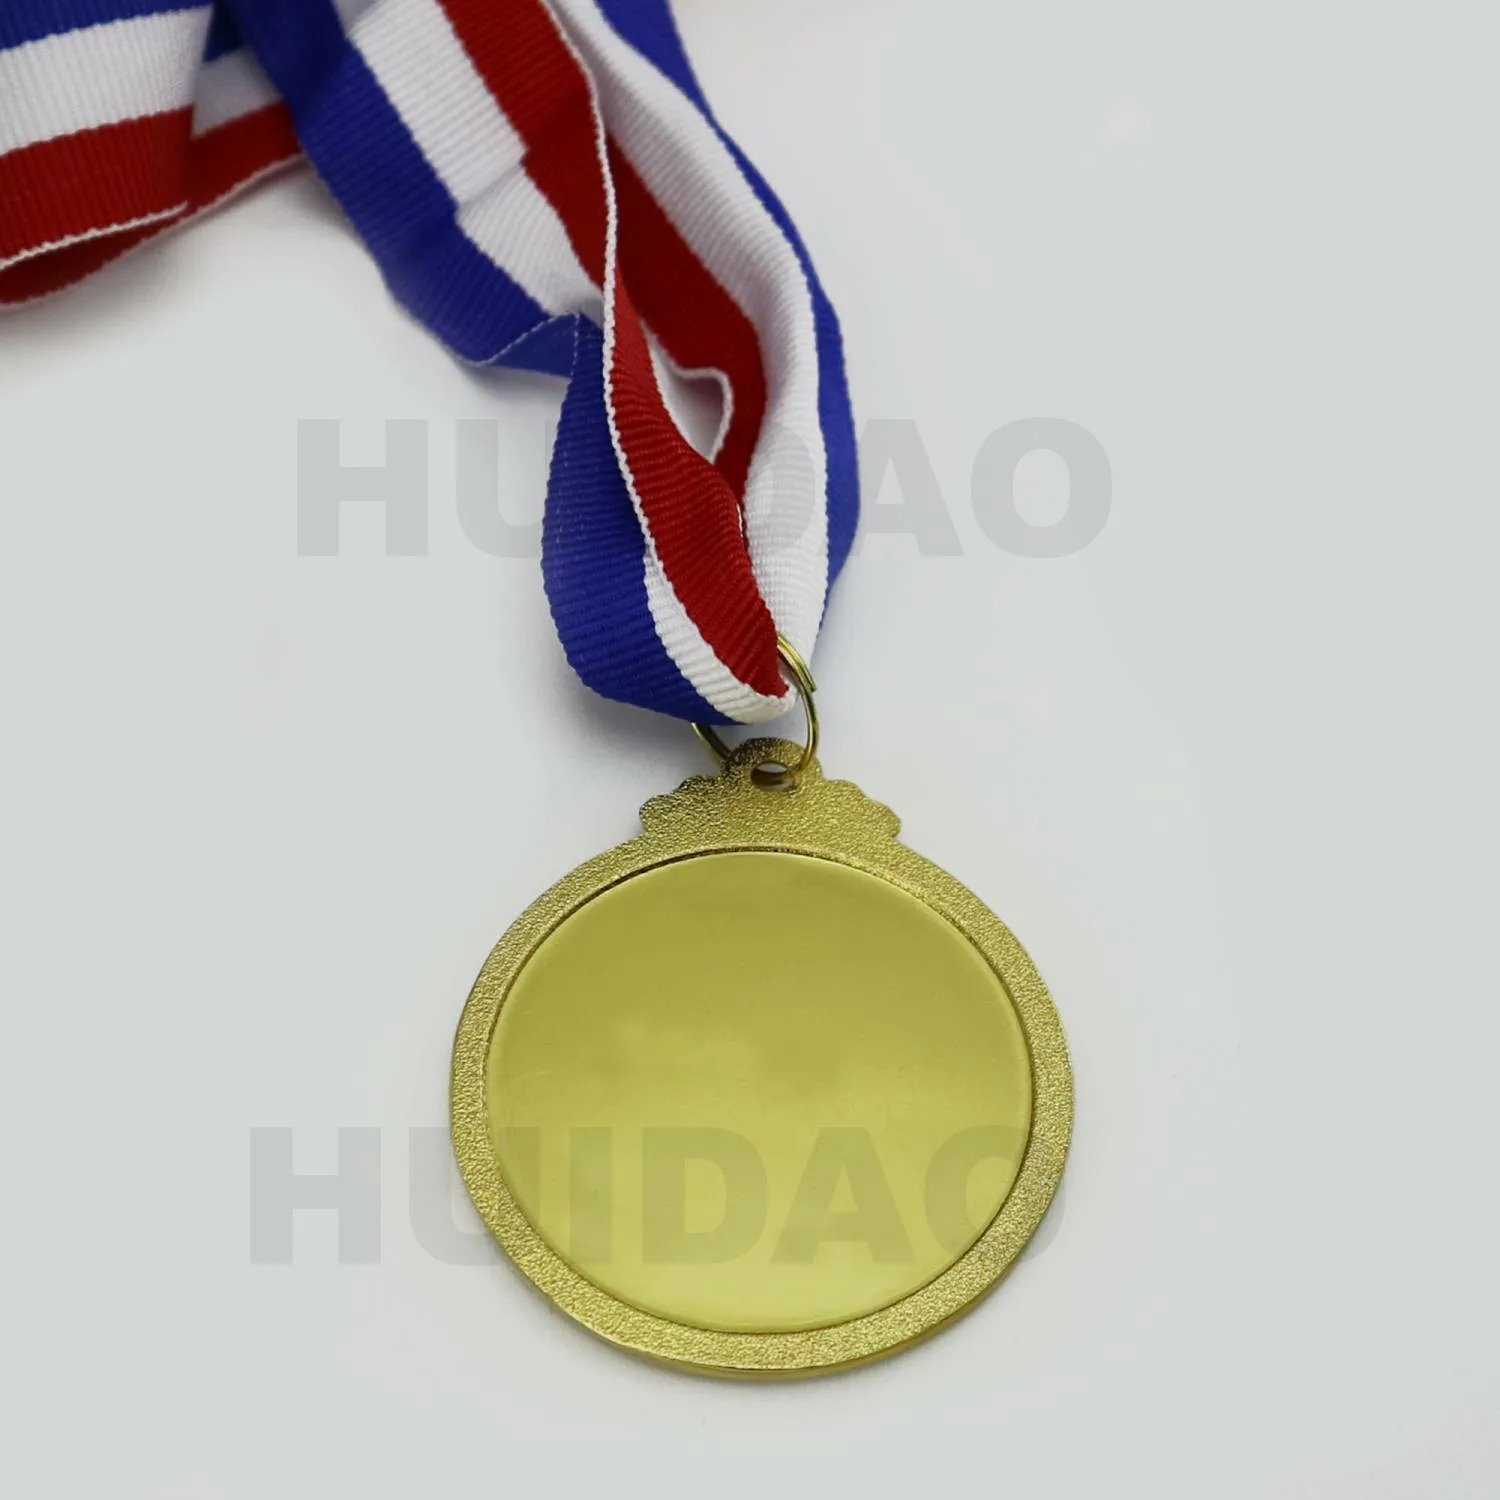 TriColor Ribbon Red White Blue 1.75" Silver Finished Medal for Soccer Tournament 